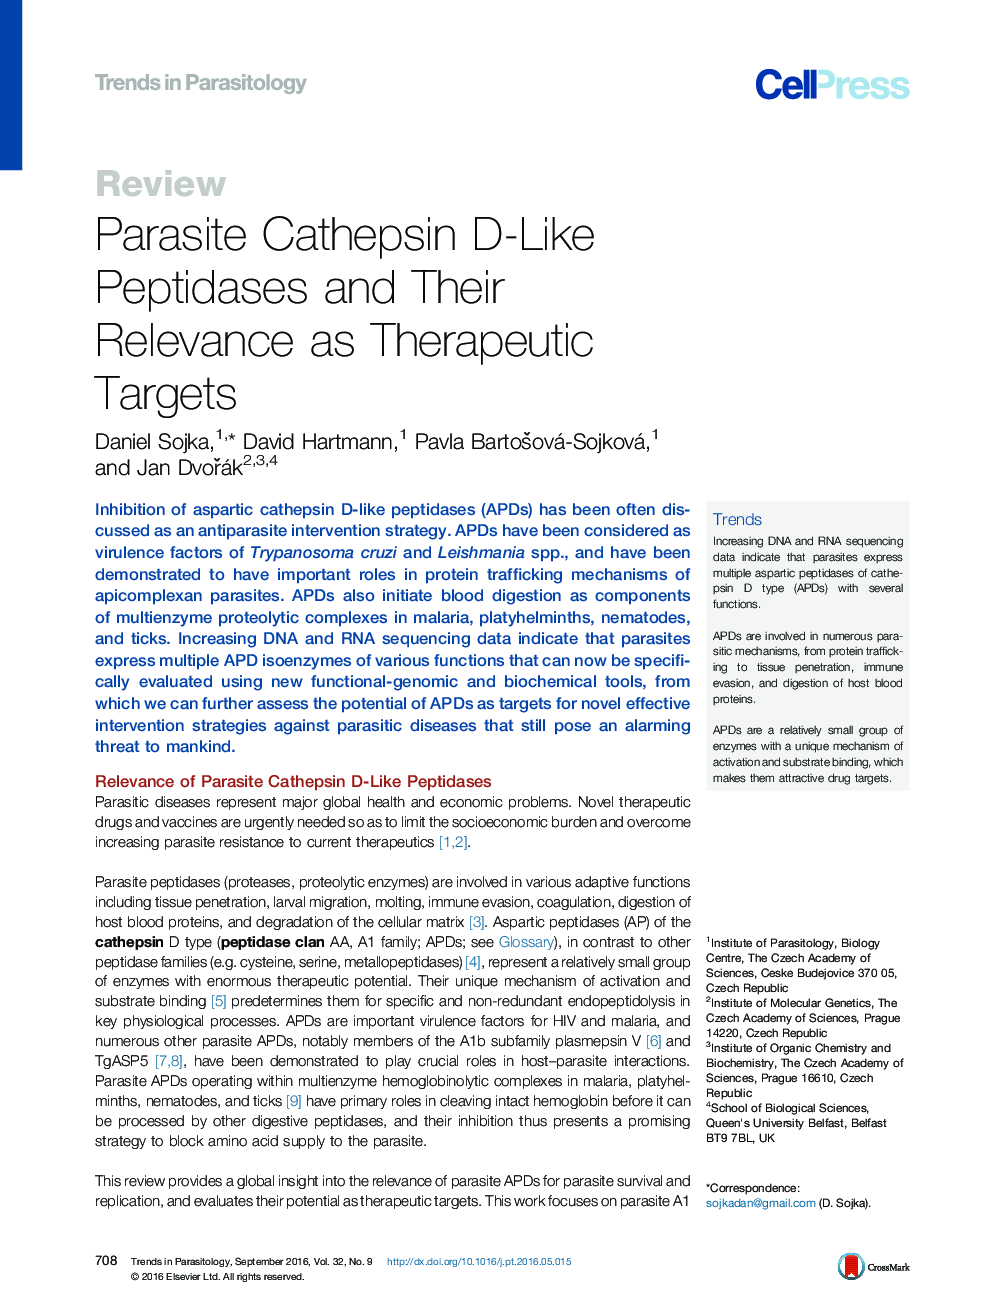 Parasite Cathepsin D-Like Peptidases and Their Relevance as Therapeutic Targets